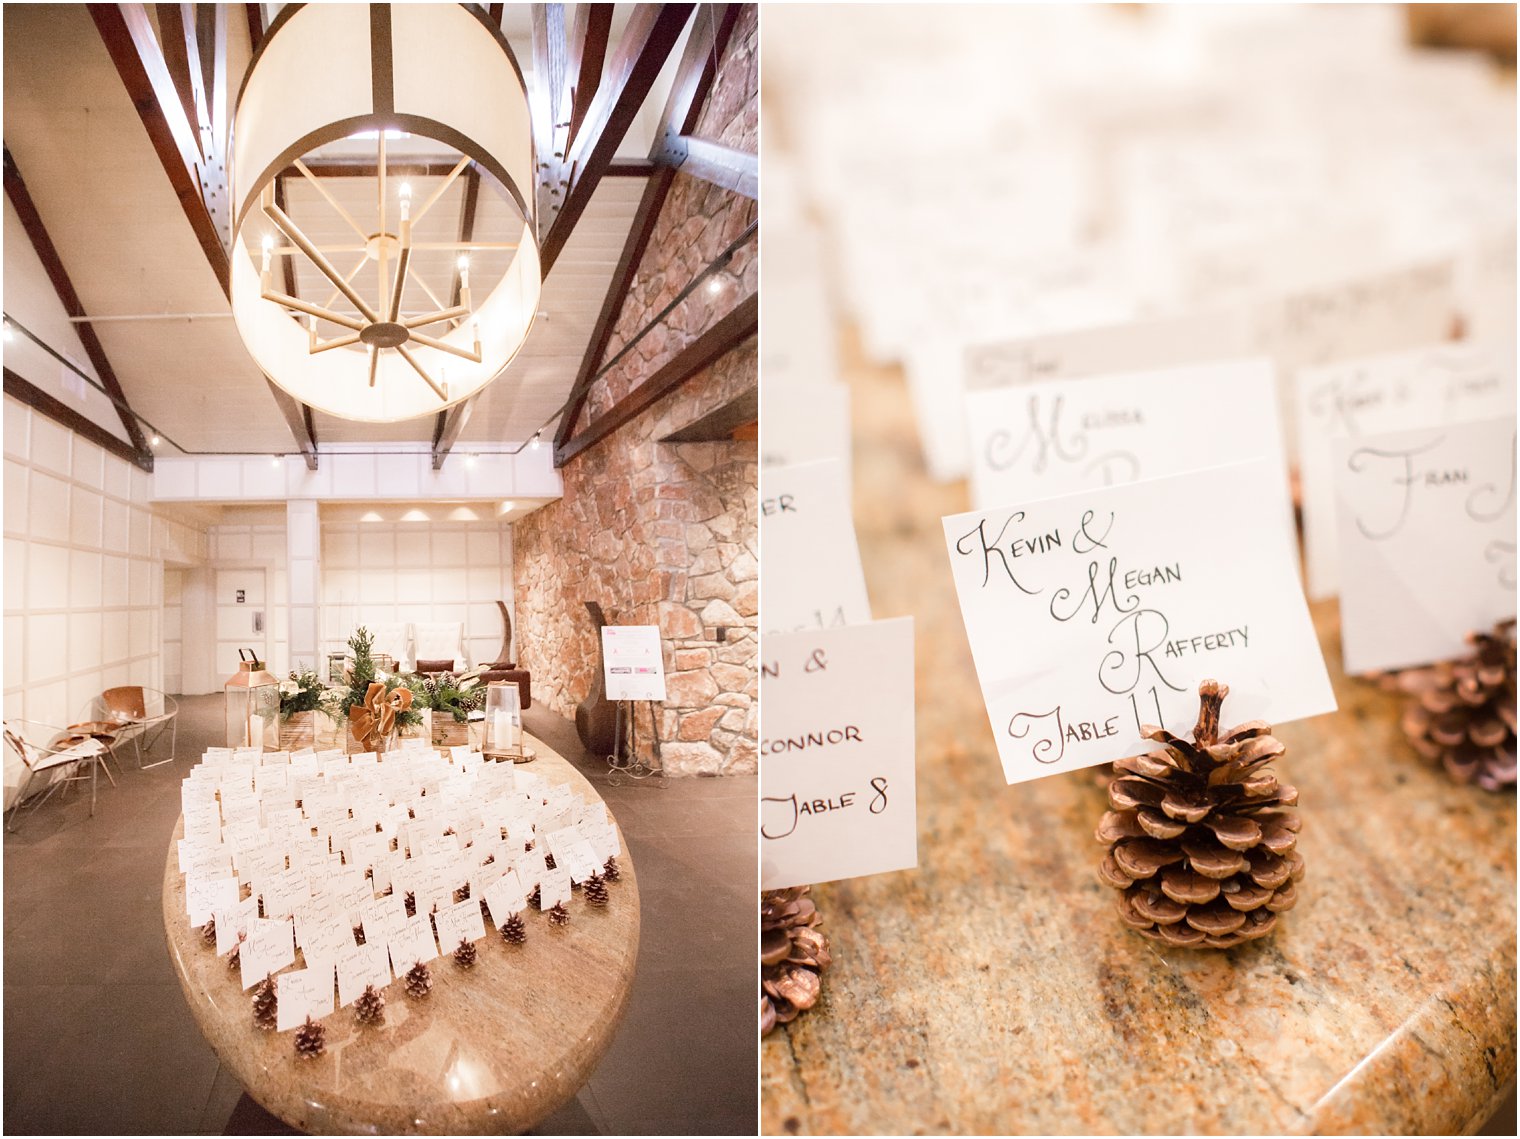 Pine cones as seating cards at wedding reception at Stone House at Stirling Ridge in Warren, NJ